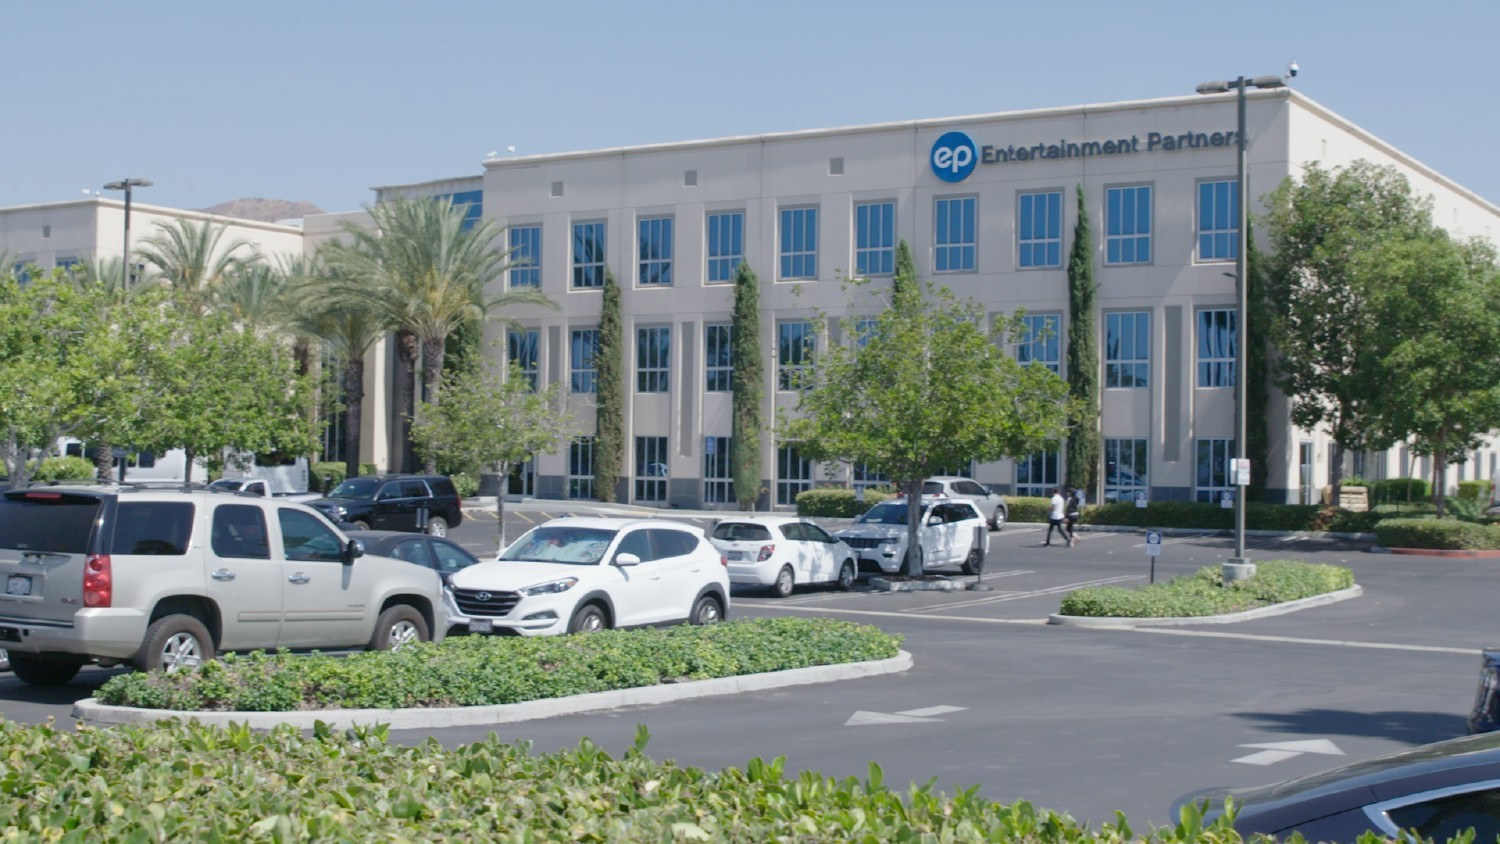 Our headquarters are located in Burbank, California, where the majority of our employees work.